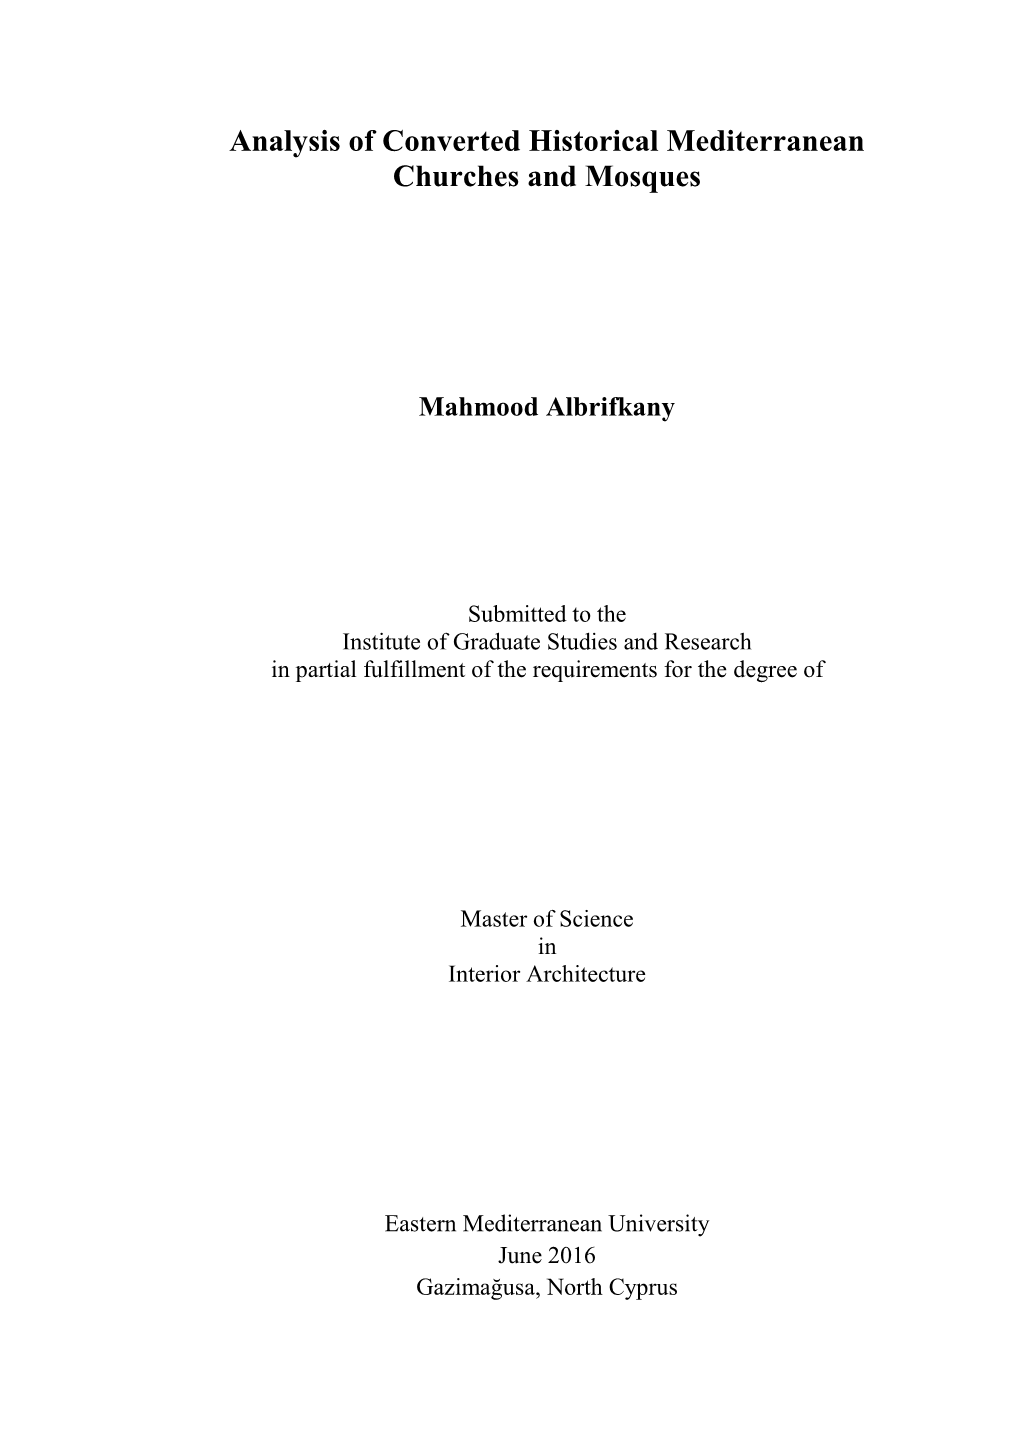 Analysis of Converted Historical Mediterranean Churches and Mosques